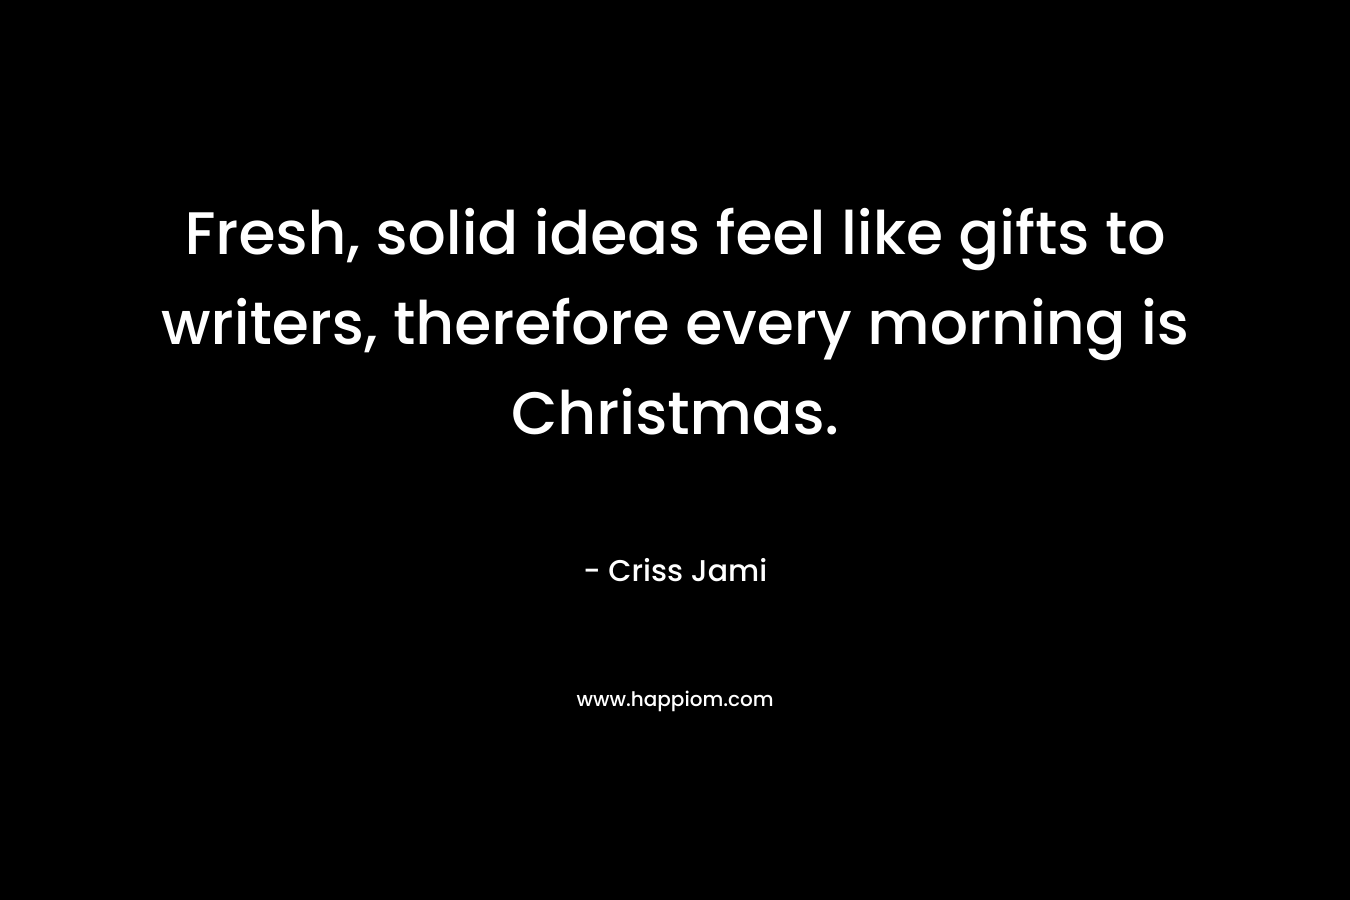 Fresh, solid ideas feel like gifts to writers, therefore every morning is Christmas.